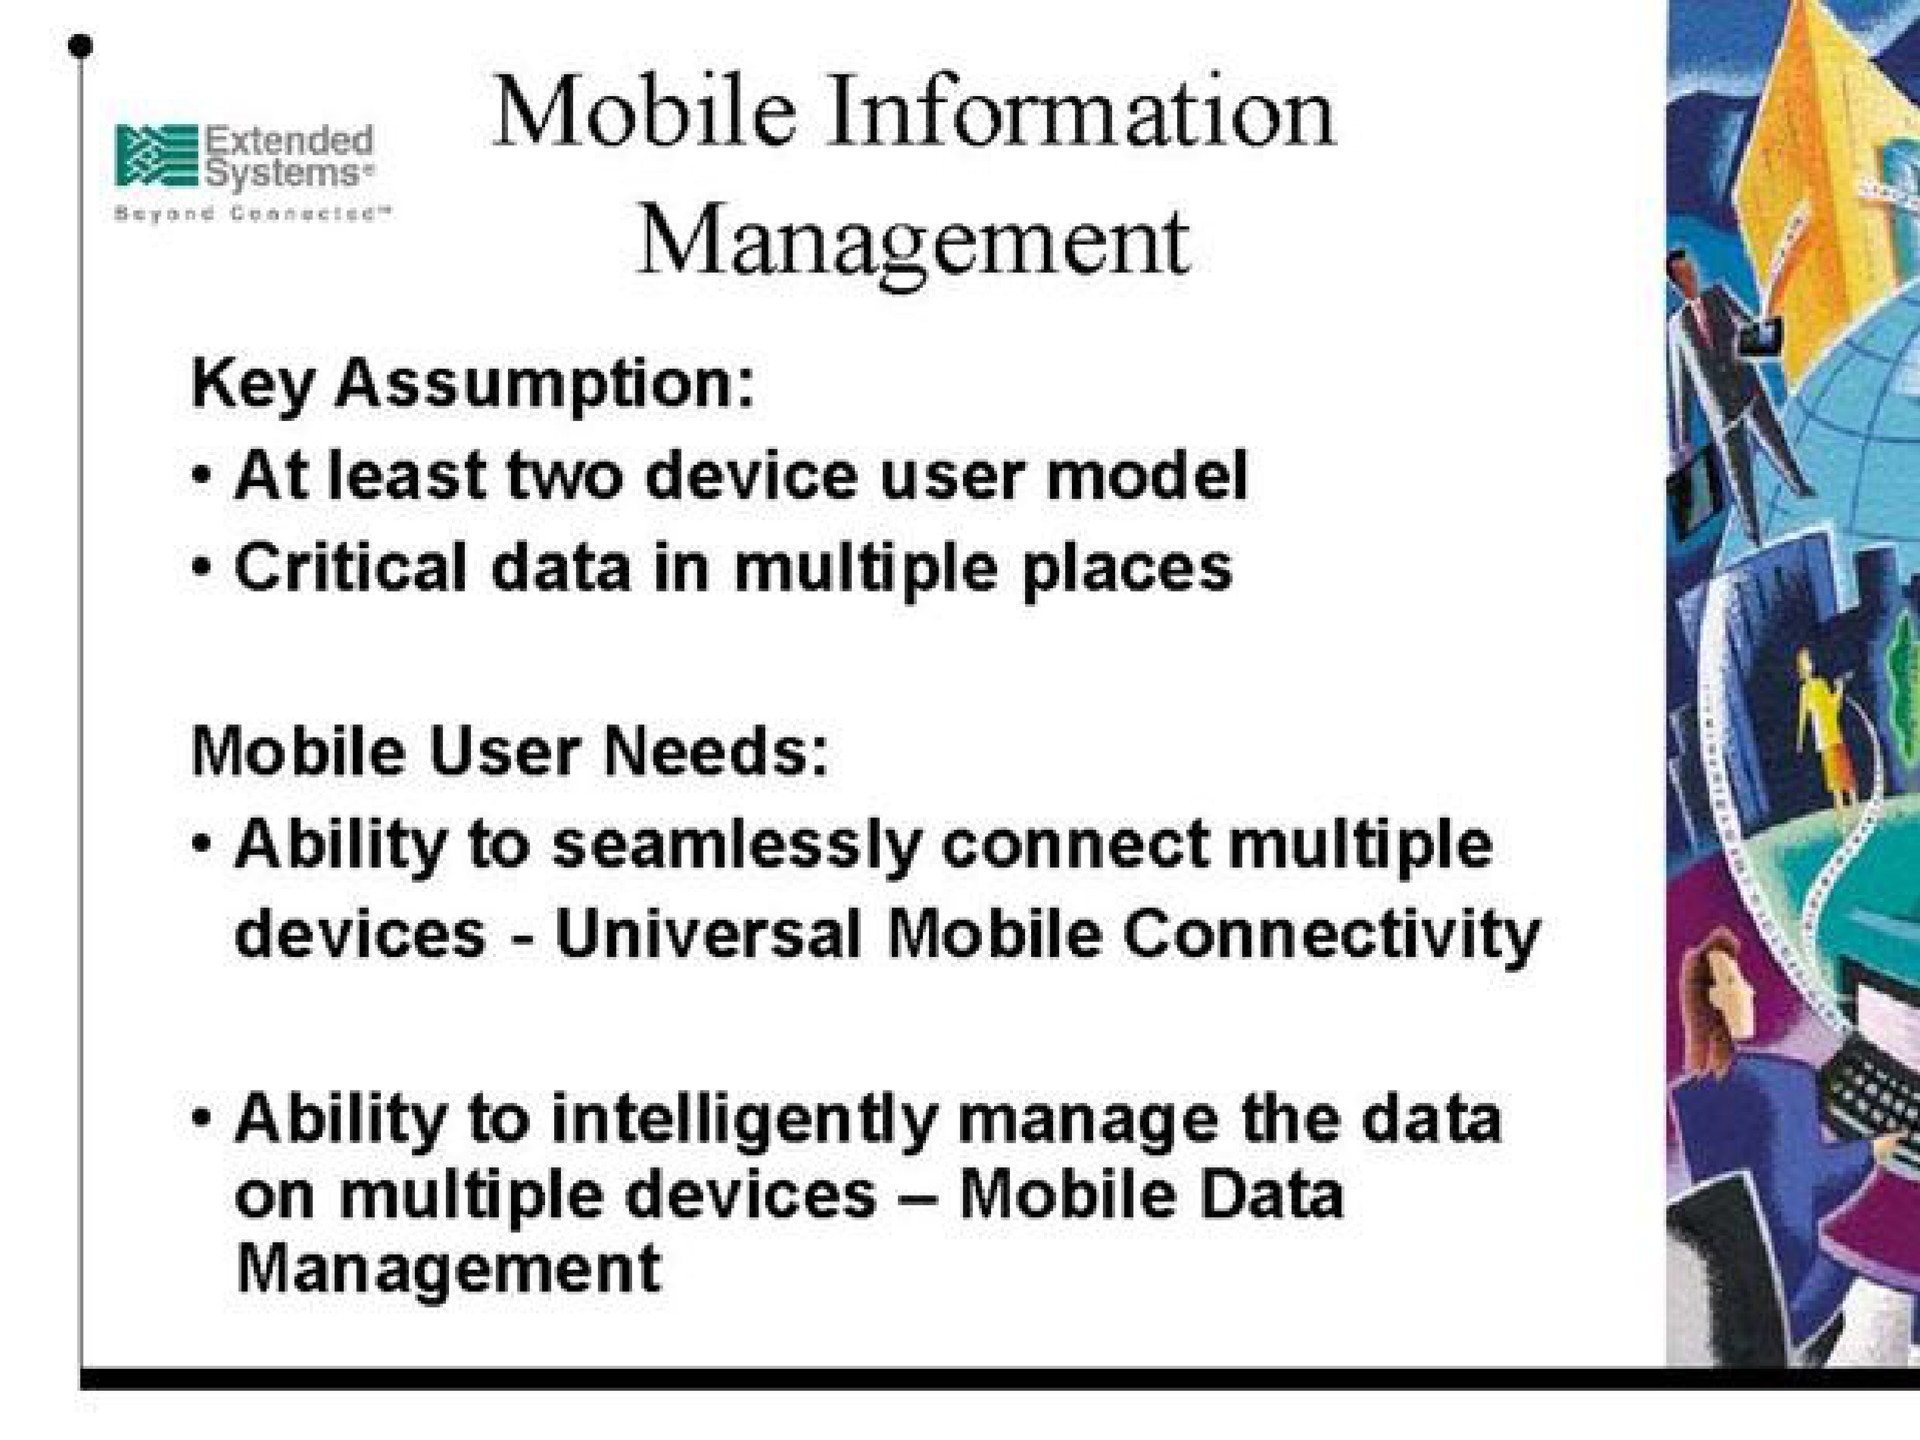 mobile information management critical data in multiple places | Extended Systems